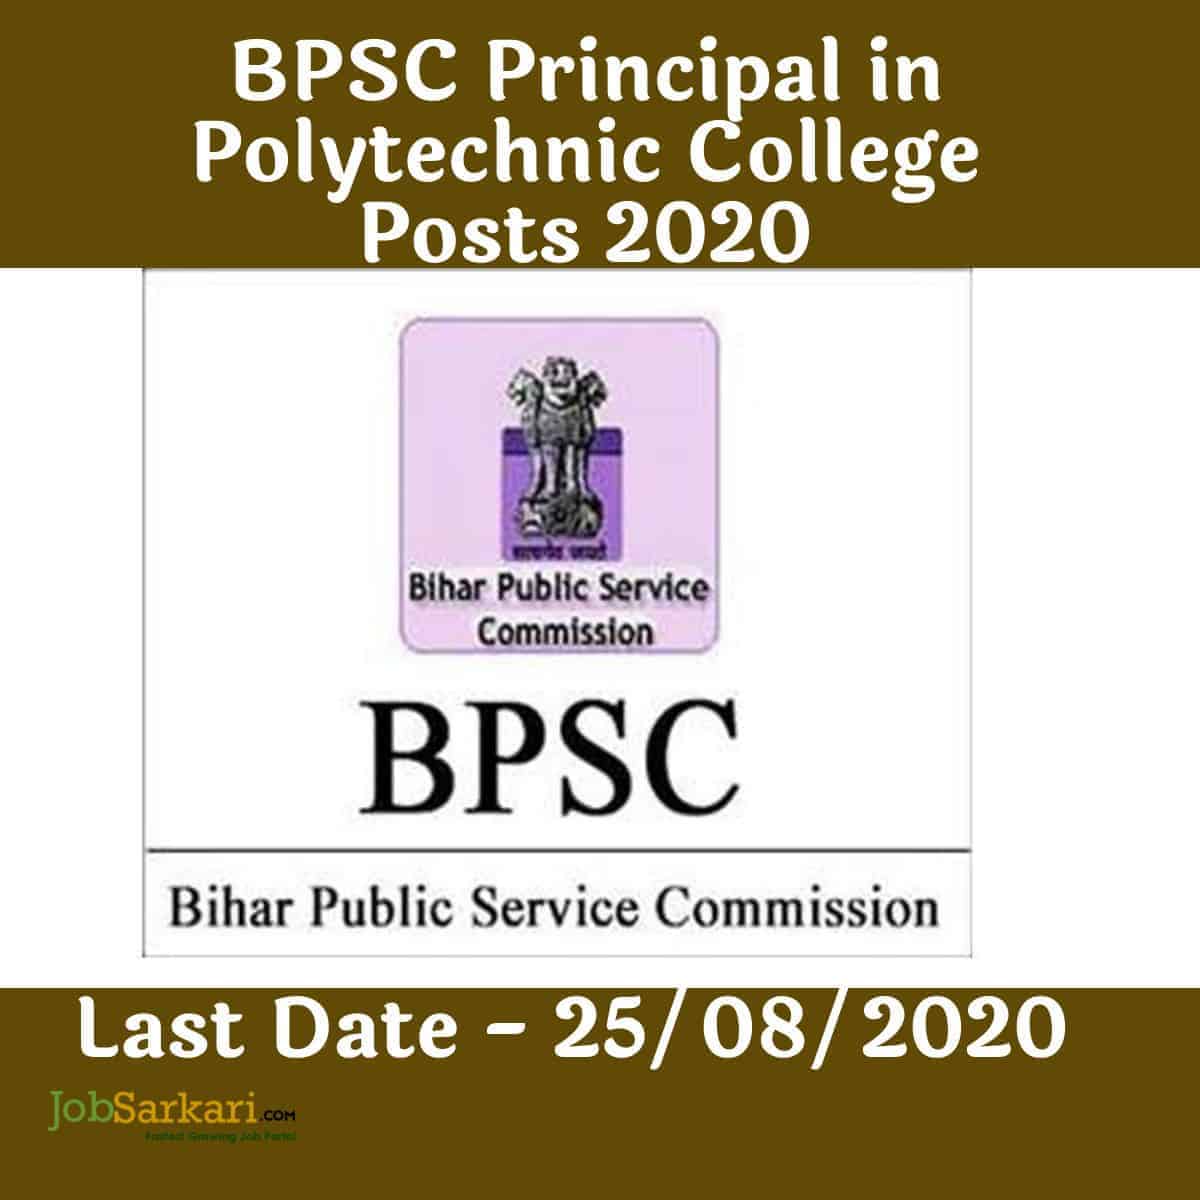 BPSC Principal in Polytechnic College Posts 2020